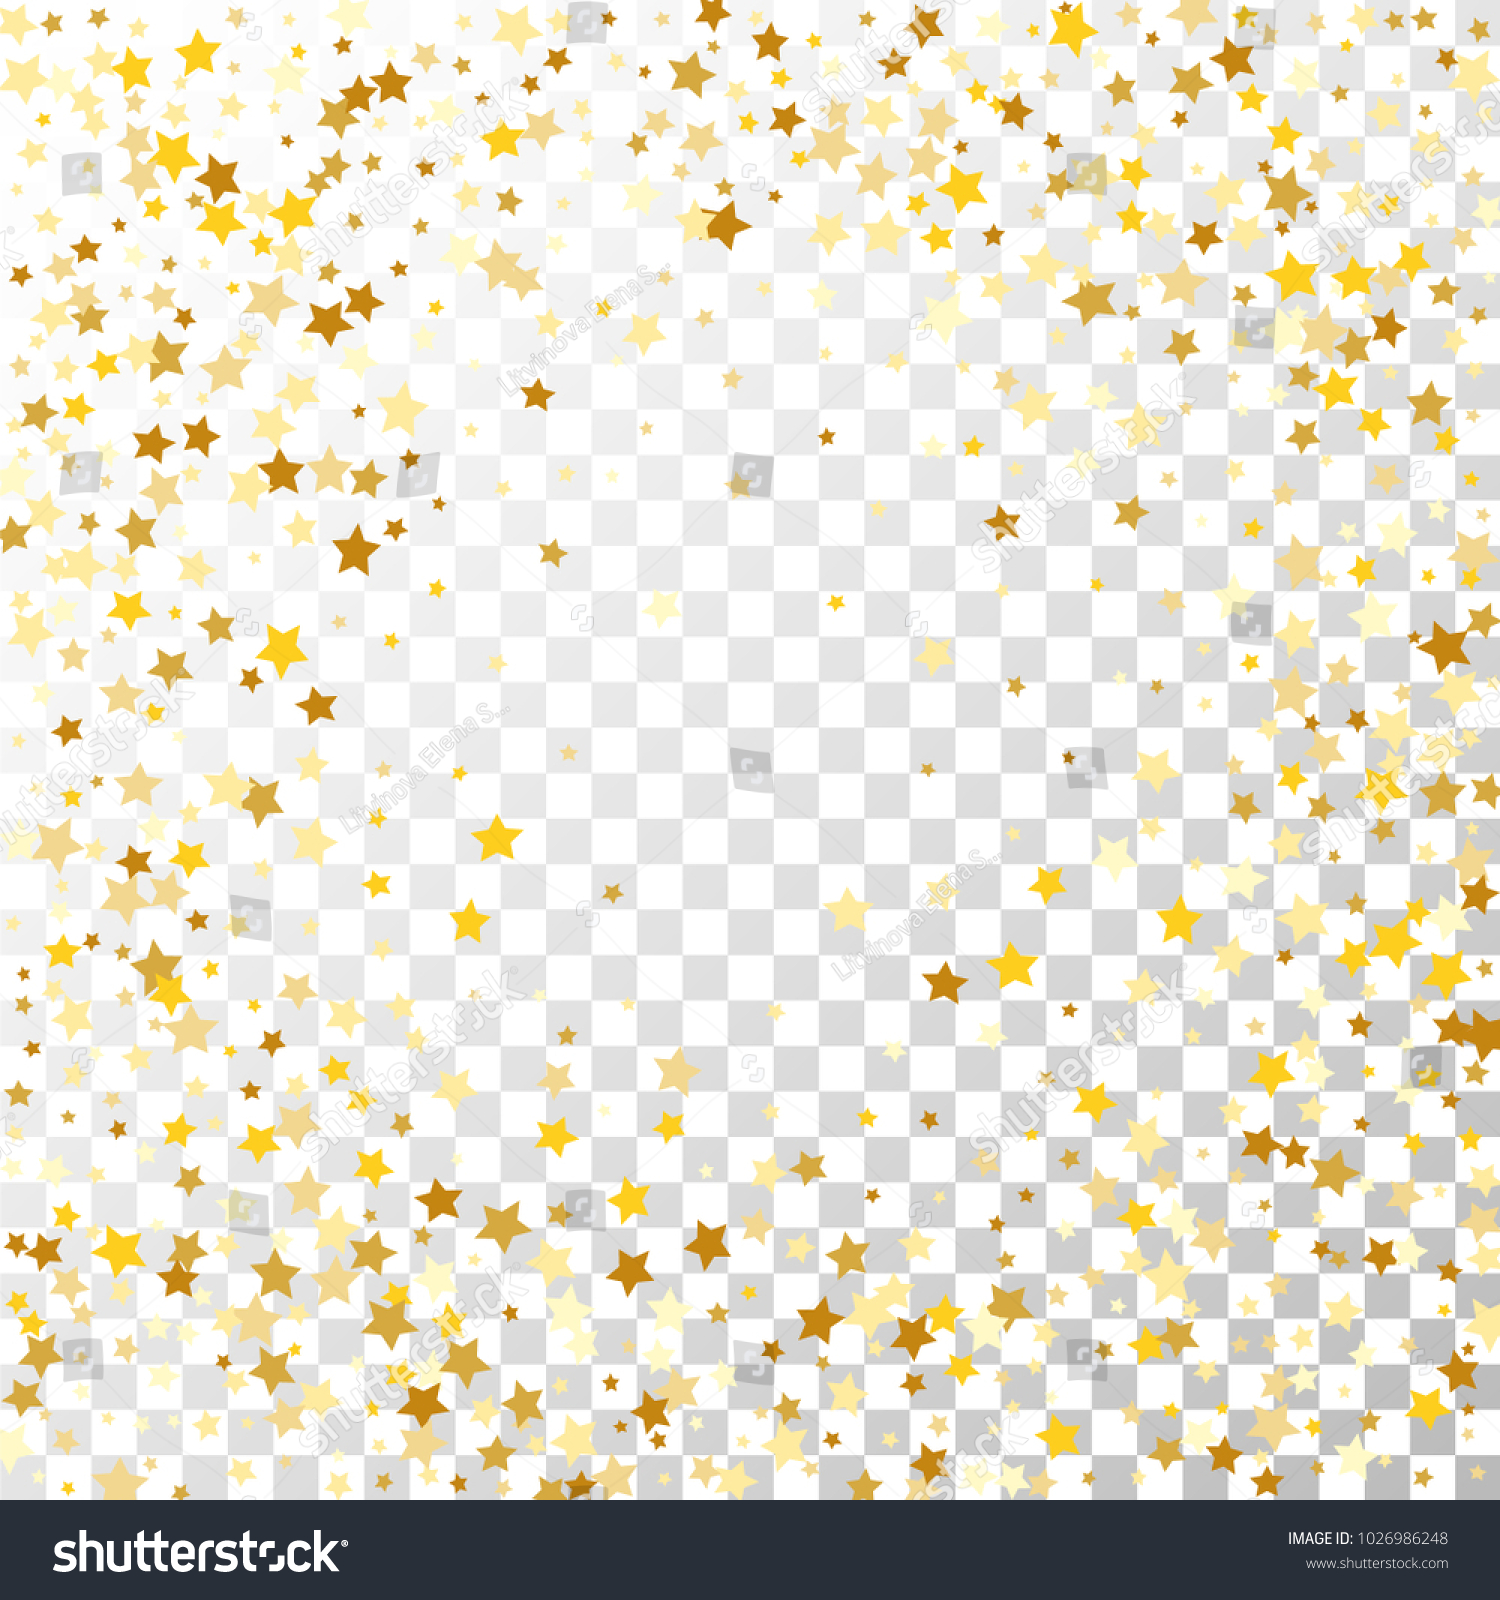 Golden Stars Background. Beautiful Falling Golden Stars Confetti. Abstract Decoration for Party, Birthday Celebrate, Anniversary or Event, Festive. Vector illustration #1026986248